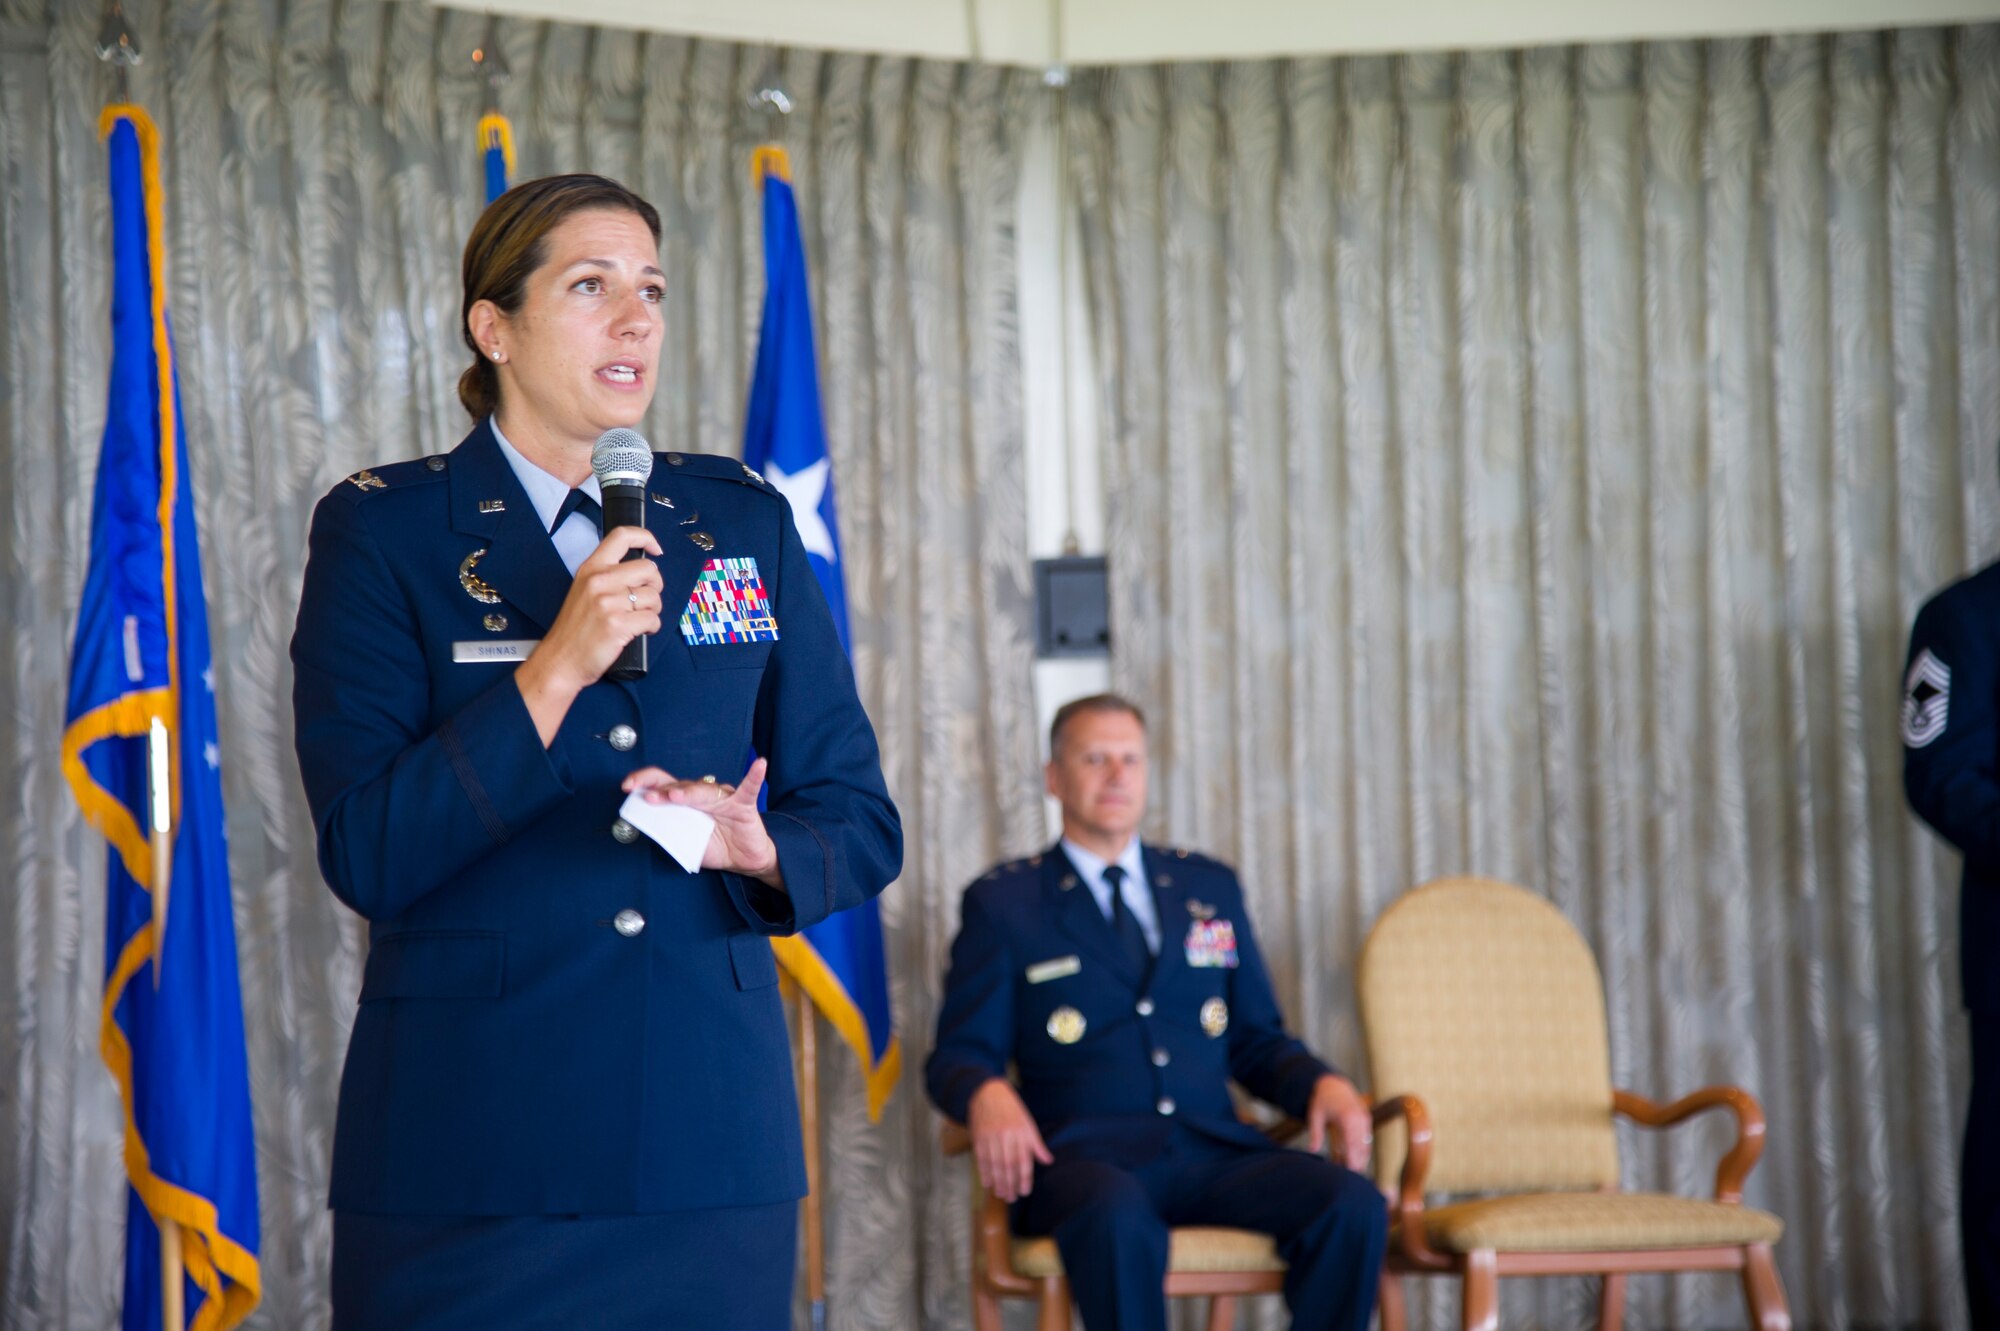 U.S. Air Force Col. Athanasia Shinas, 624th Regional Support Group commander, speaks to leaders and Airmen during an assumption of command ceremony at Joint Base Pearl Harbor-Hickam, Hawaii, July 7, 2018.